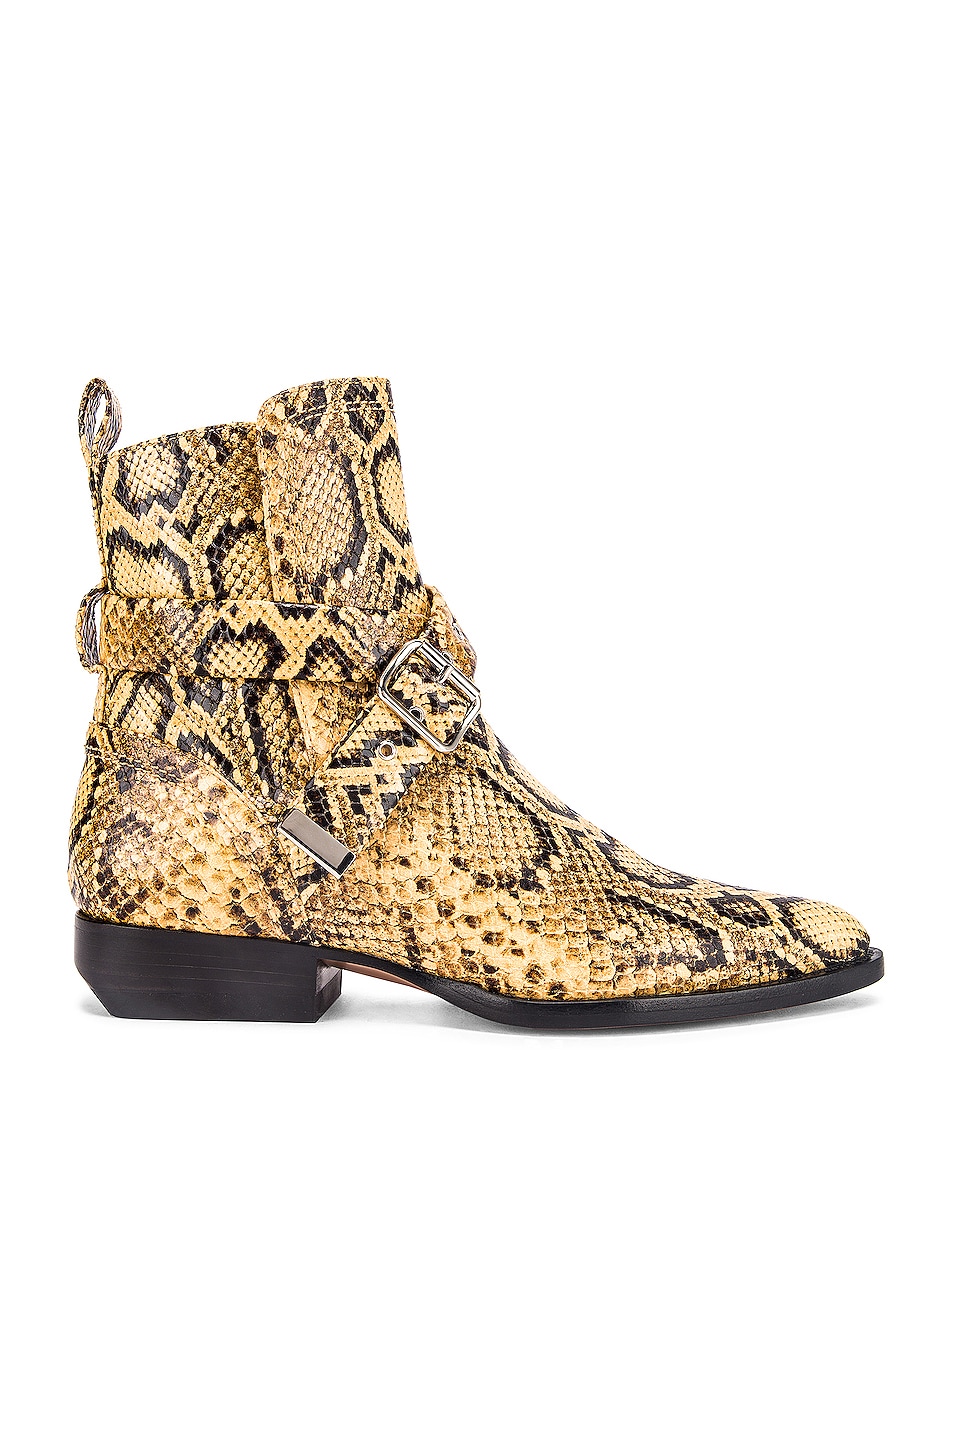 Image 1 of Chloe Python Print Rylee Boots in Wheat Yellow